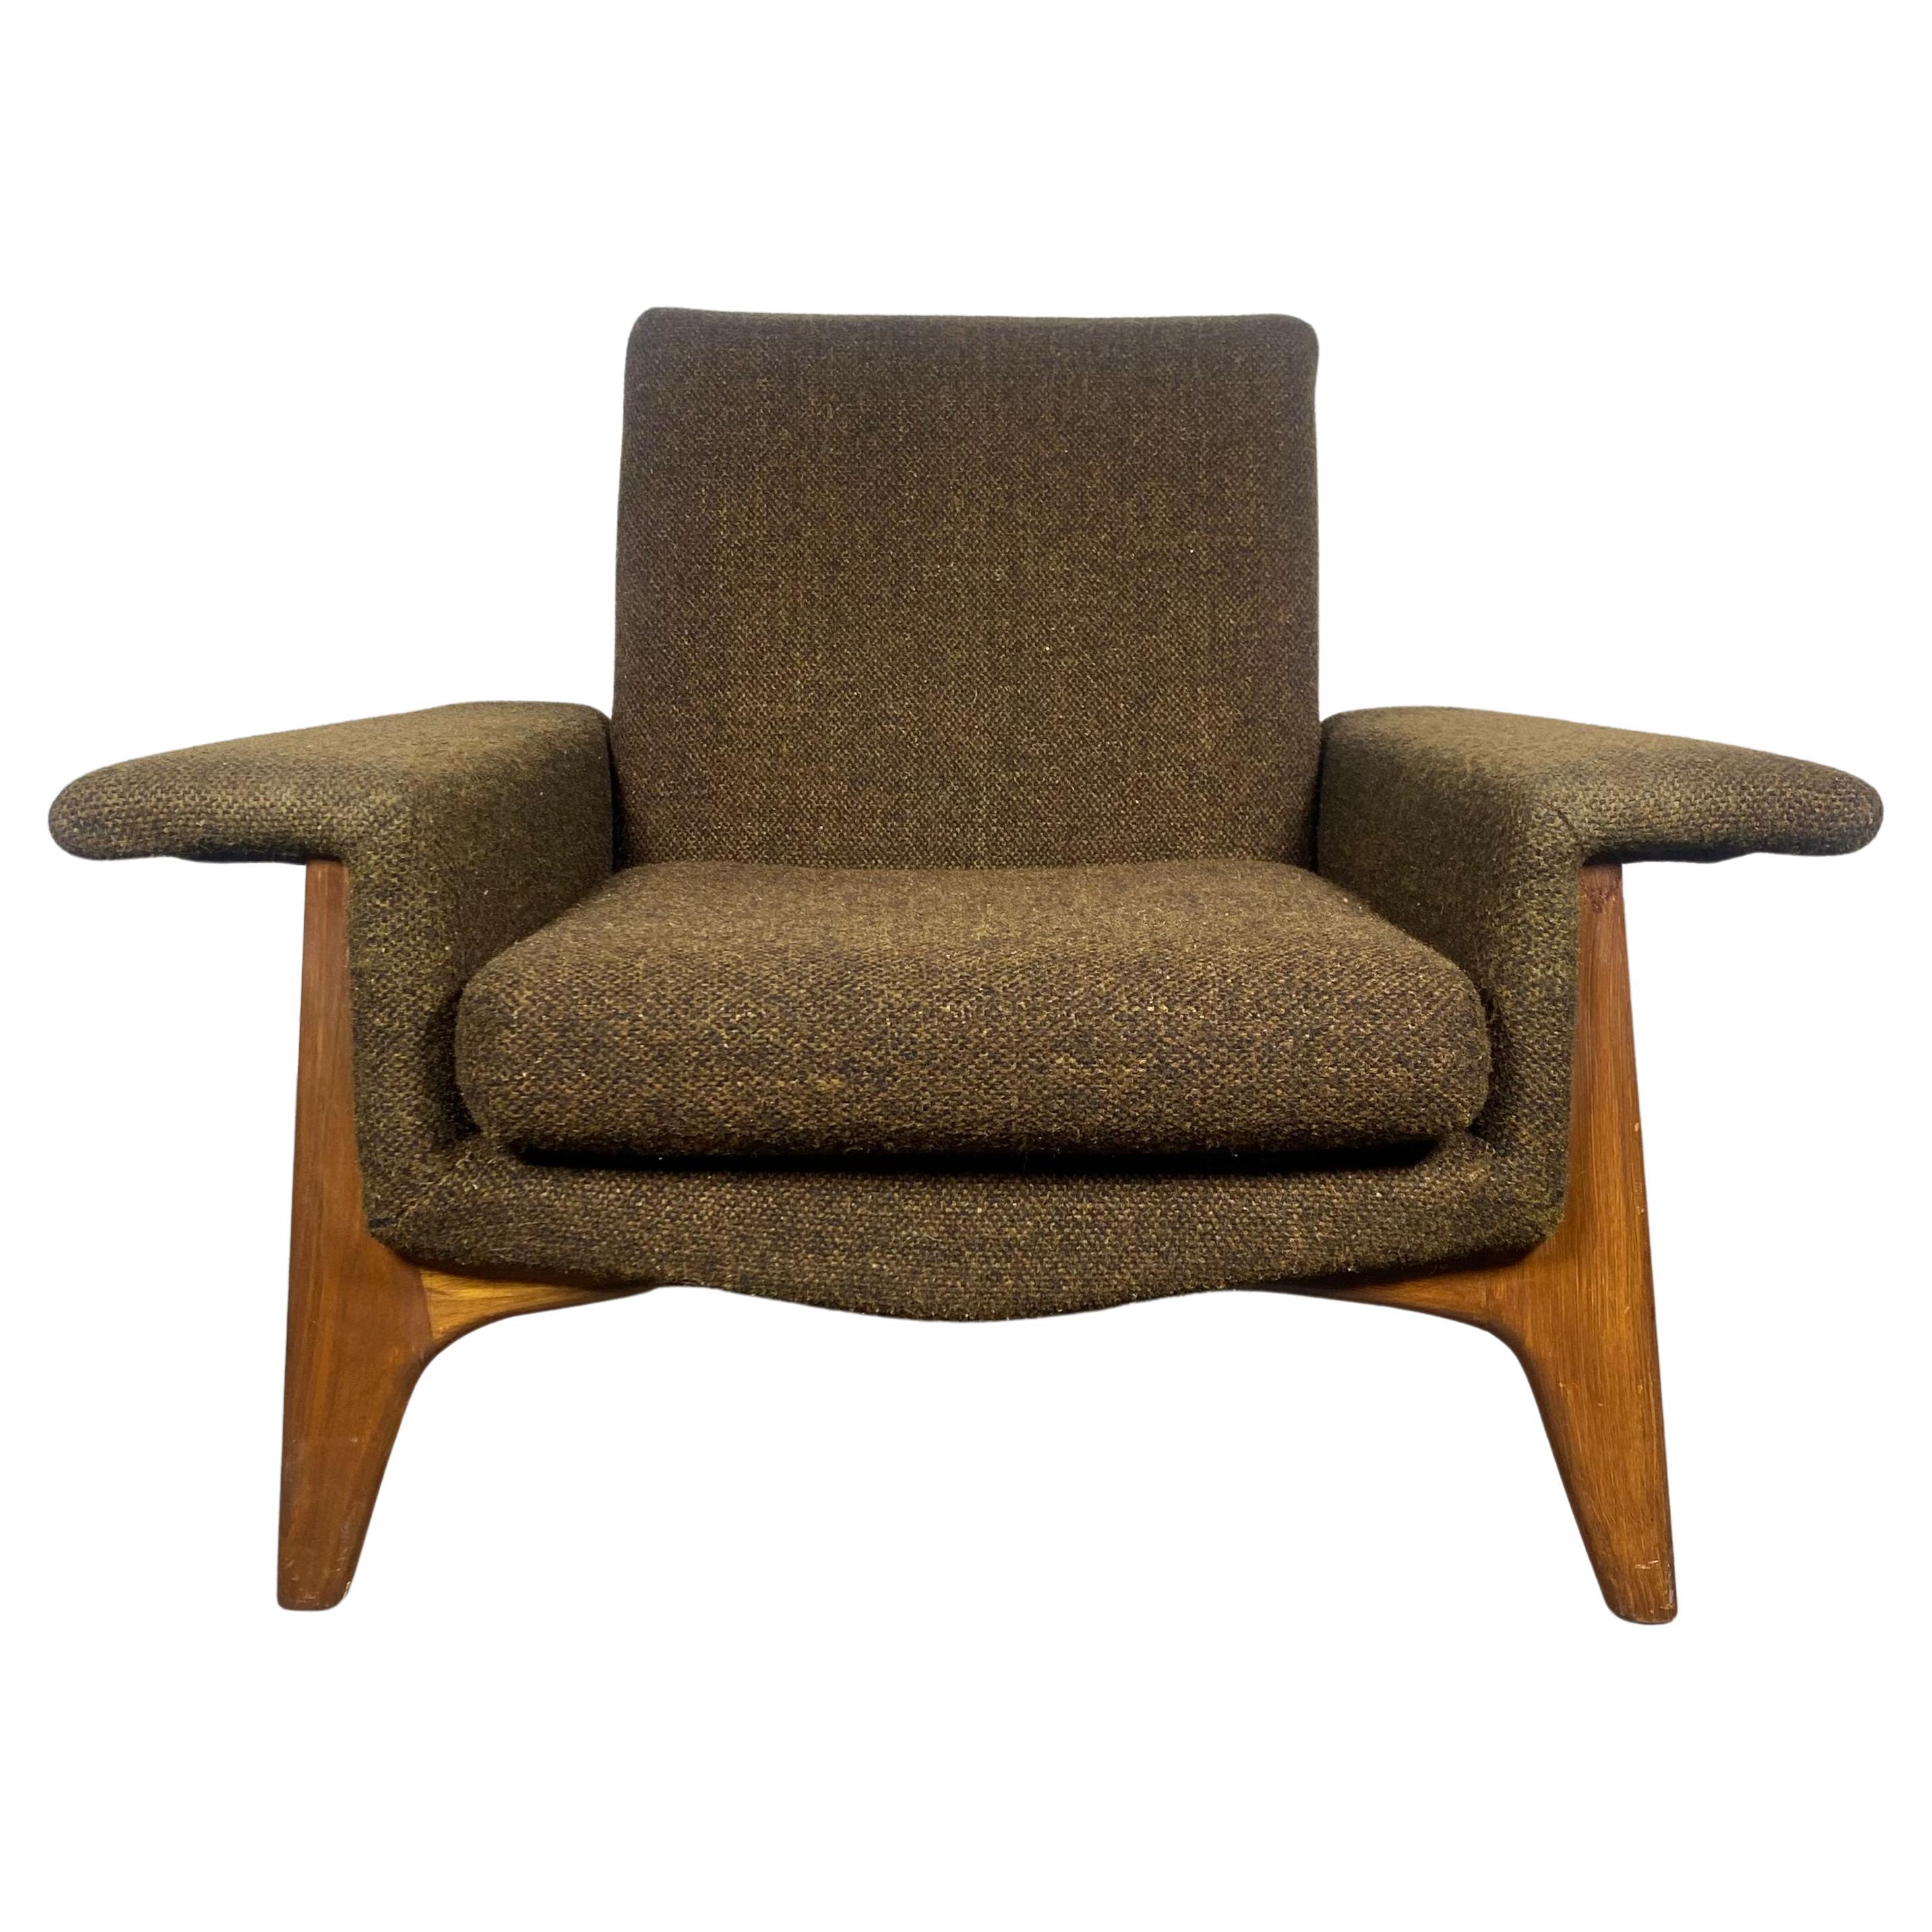 Dramatic Modernist Lounge Chair by Adrian Pearsall.Sculptural Walnut Base. For Sale